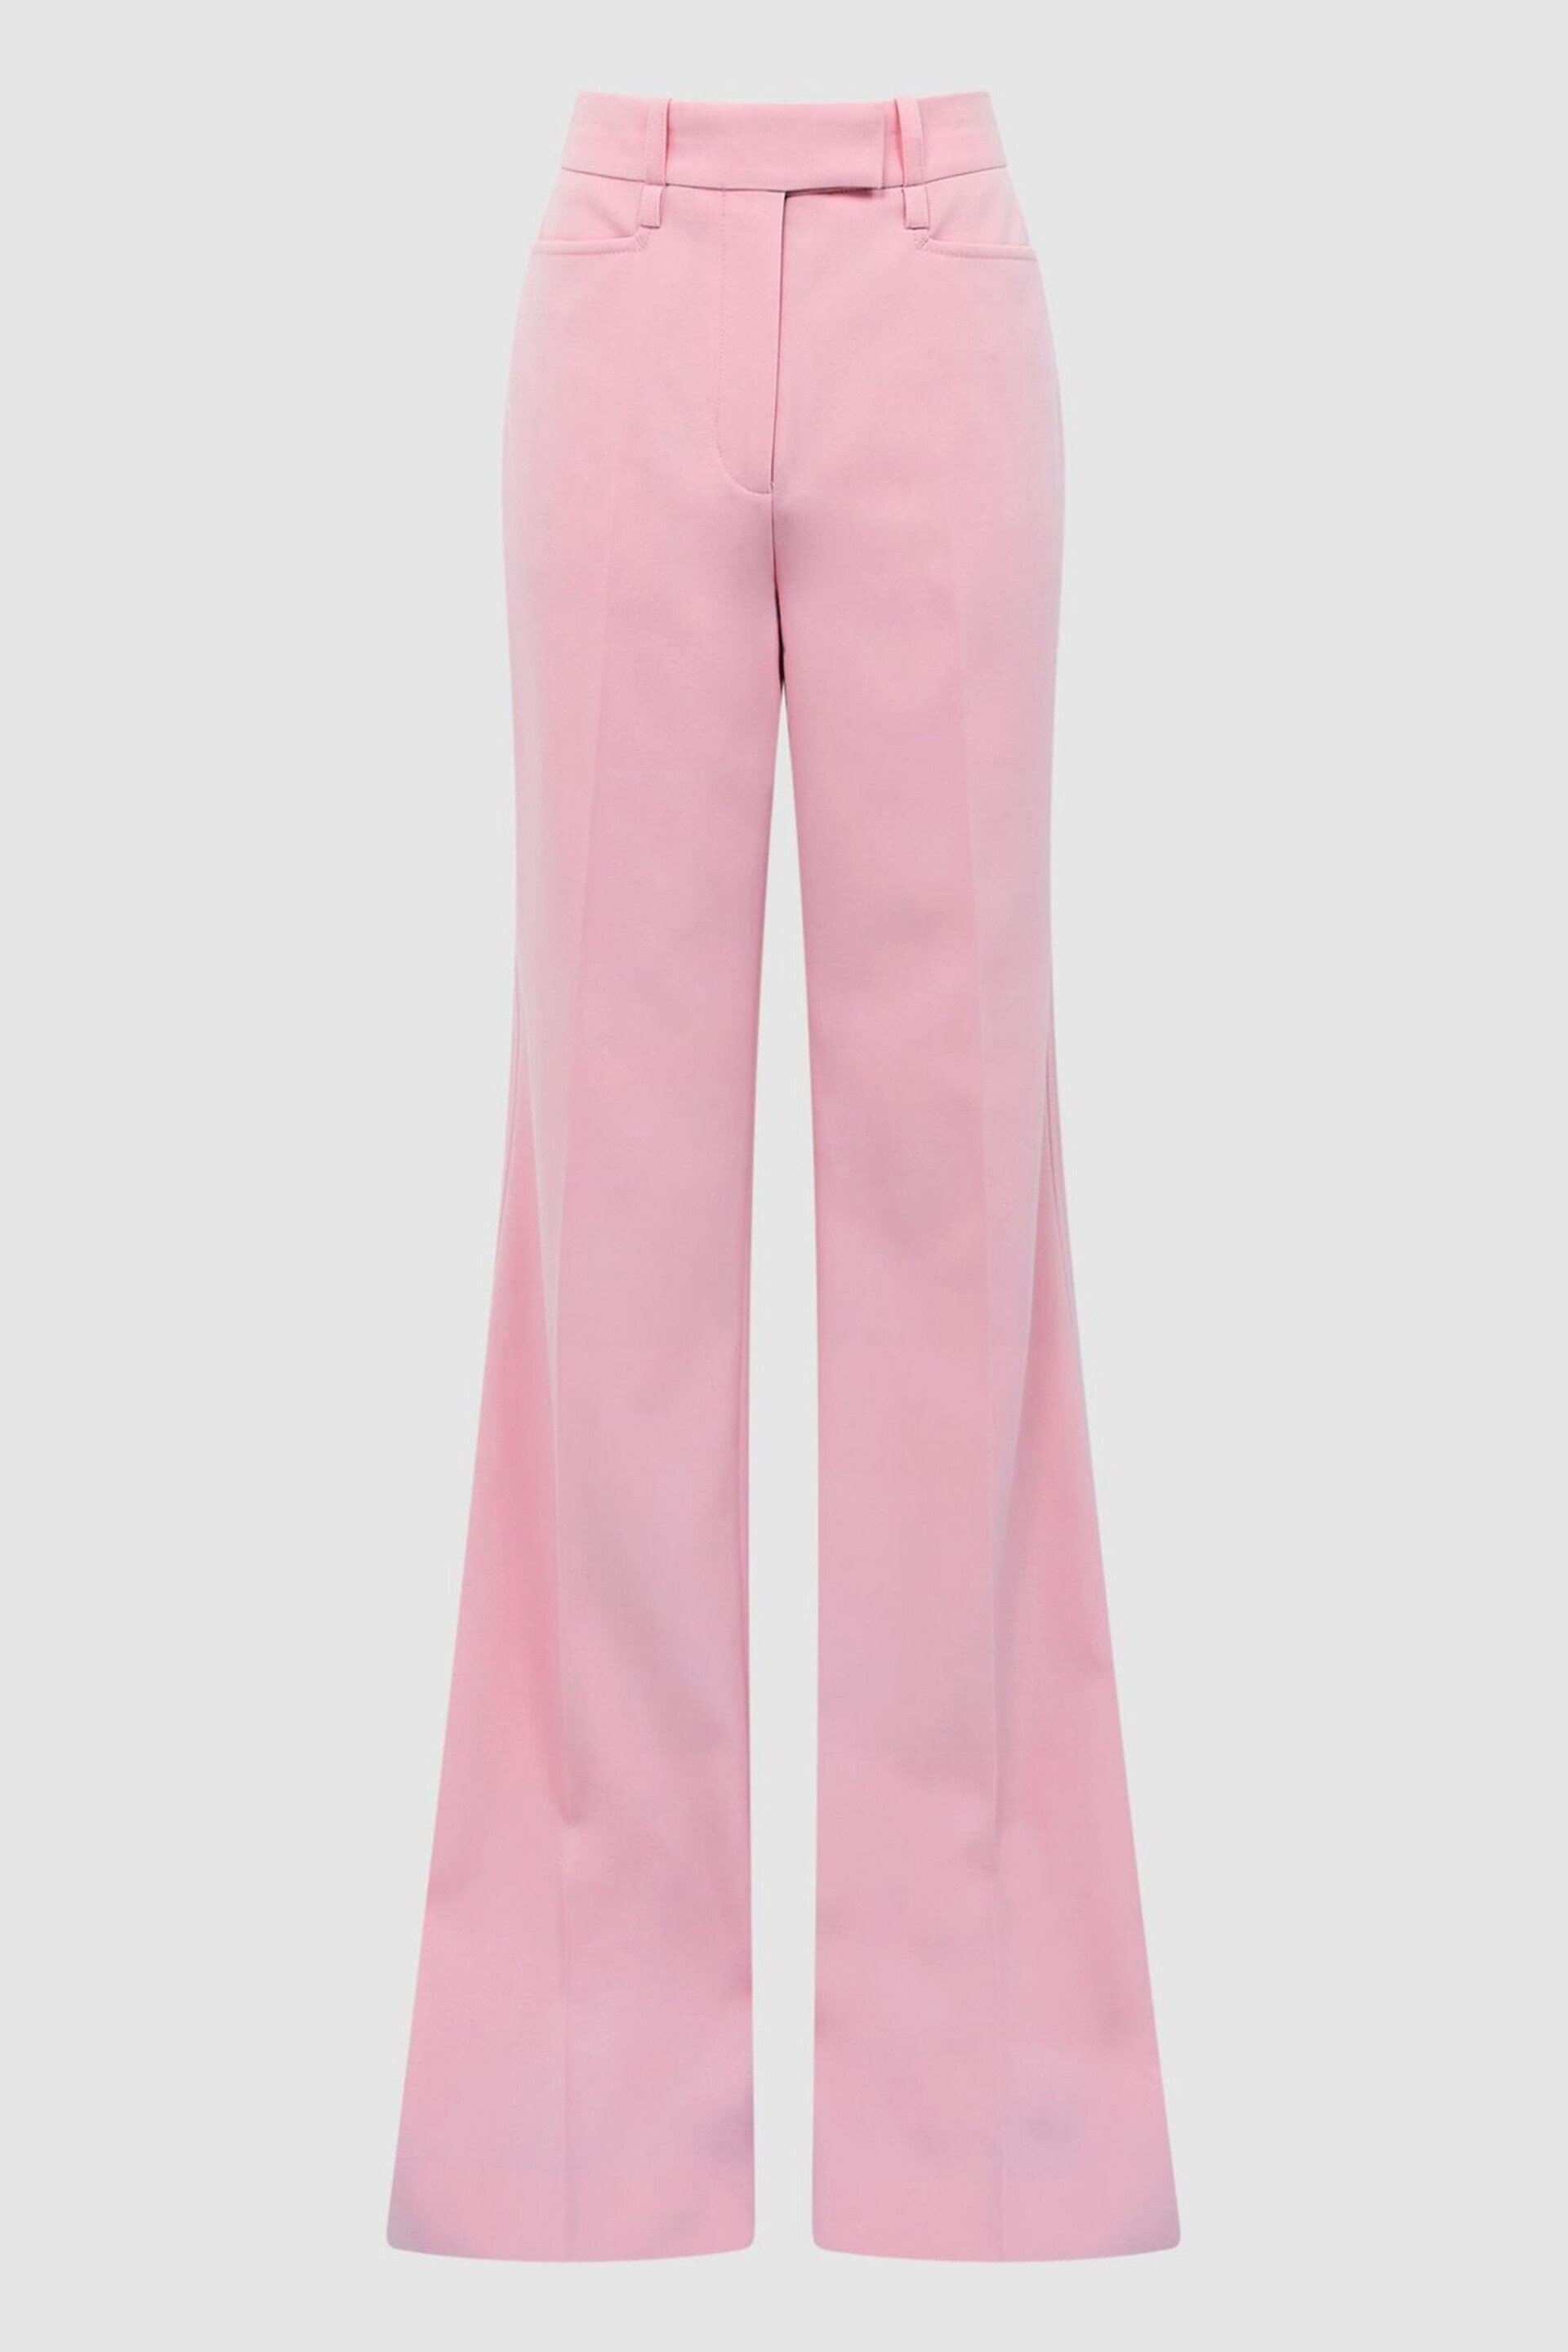 Reiss Pink Blair High Rise Wide Leg Trousers - Image 2 of 8